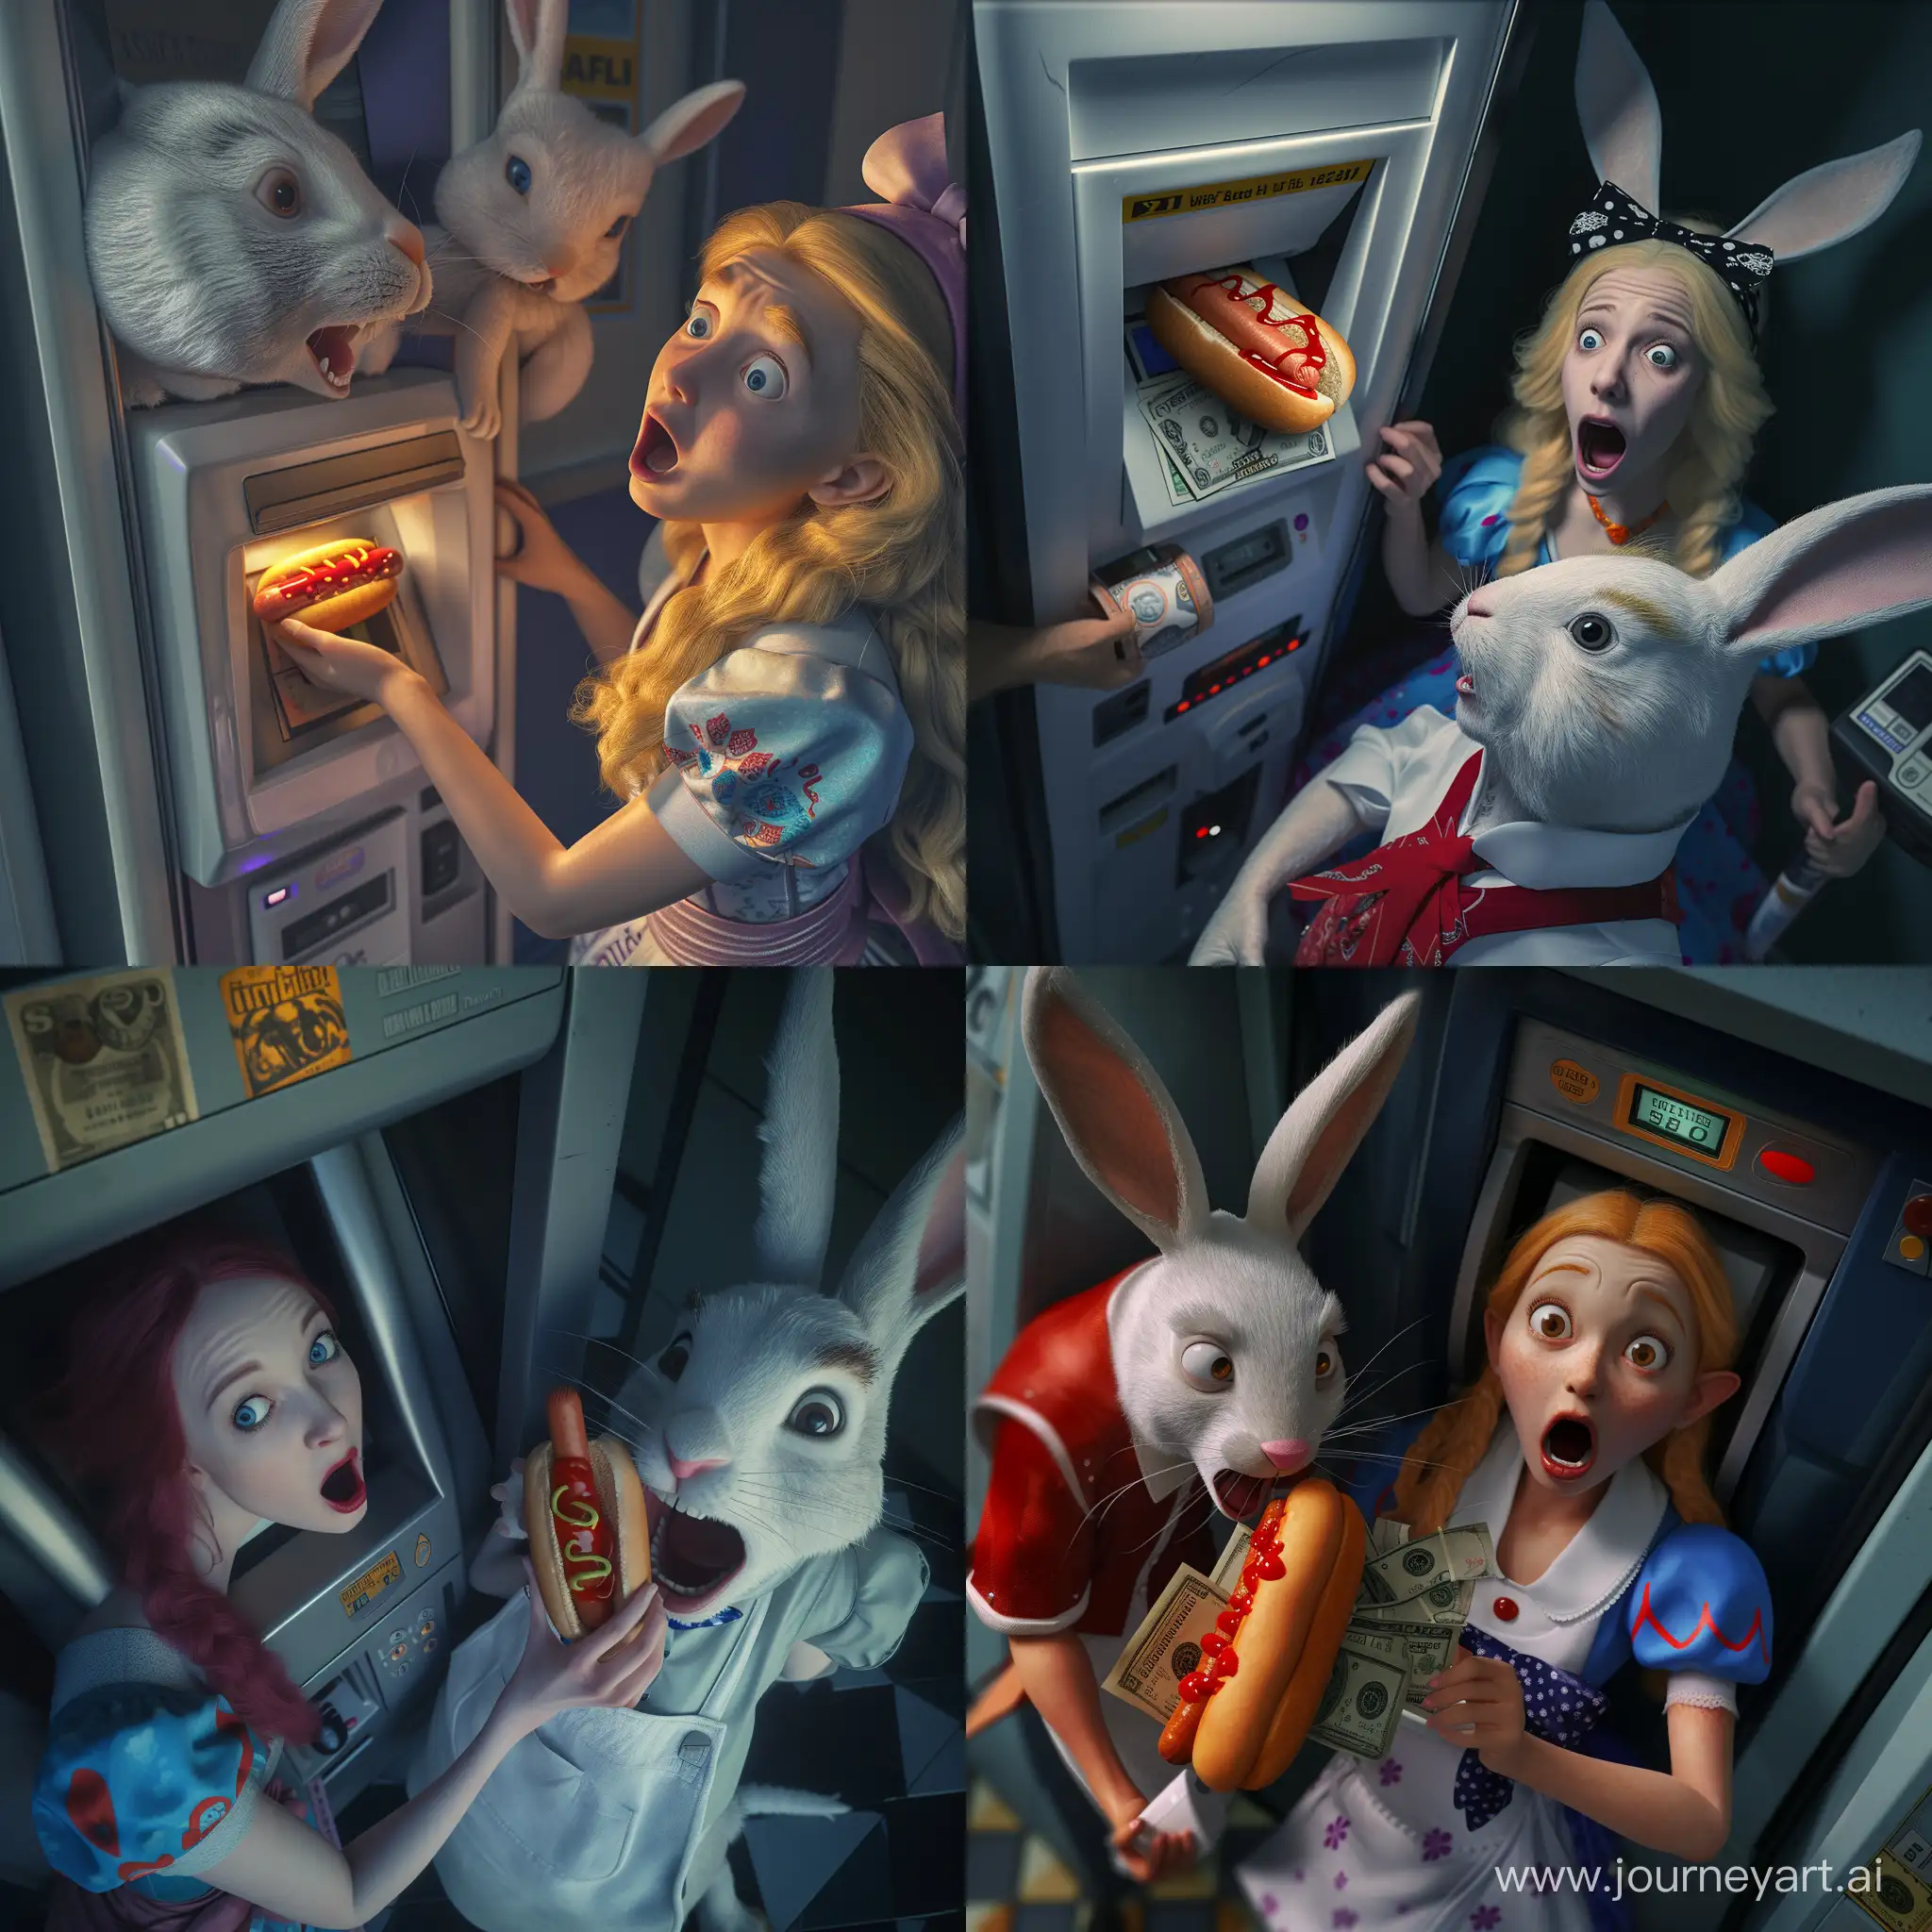 Realistic photo, top view, security camera style, Alice in wonderland is taking money from the ATM, she is surprised and she looks into the camera, close to her add the White Rabbit indulging in a hot dog while the rabbit is screaming because he got ketchup on his white shirt, photorealism, cinematic lighting, 8k